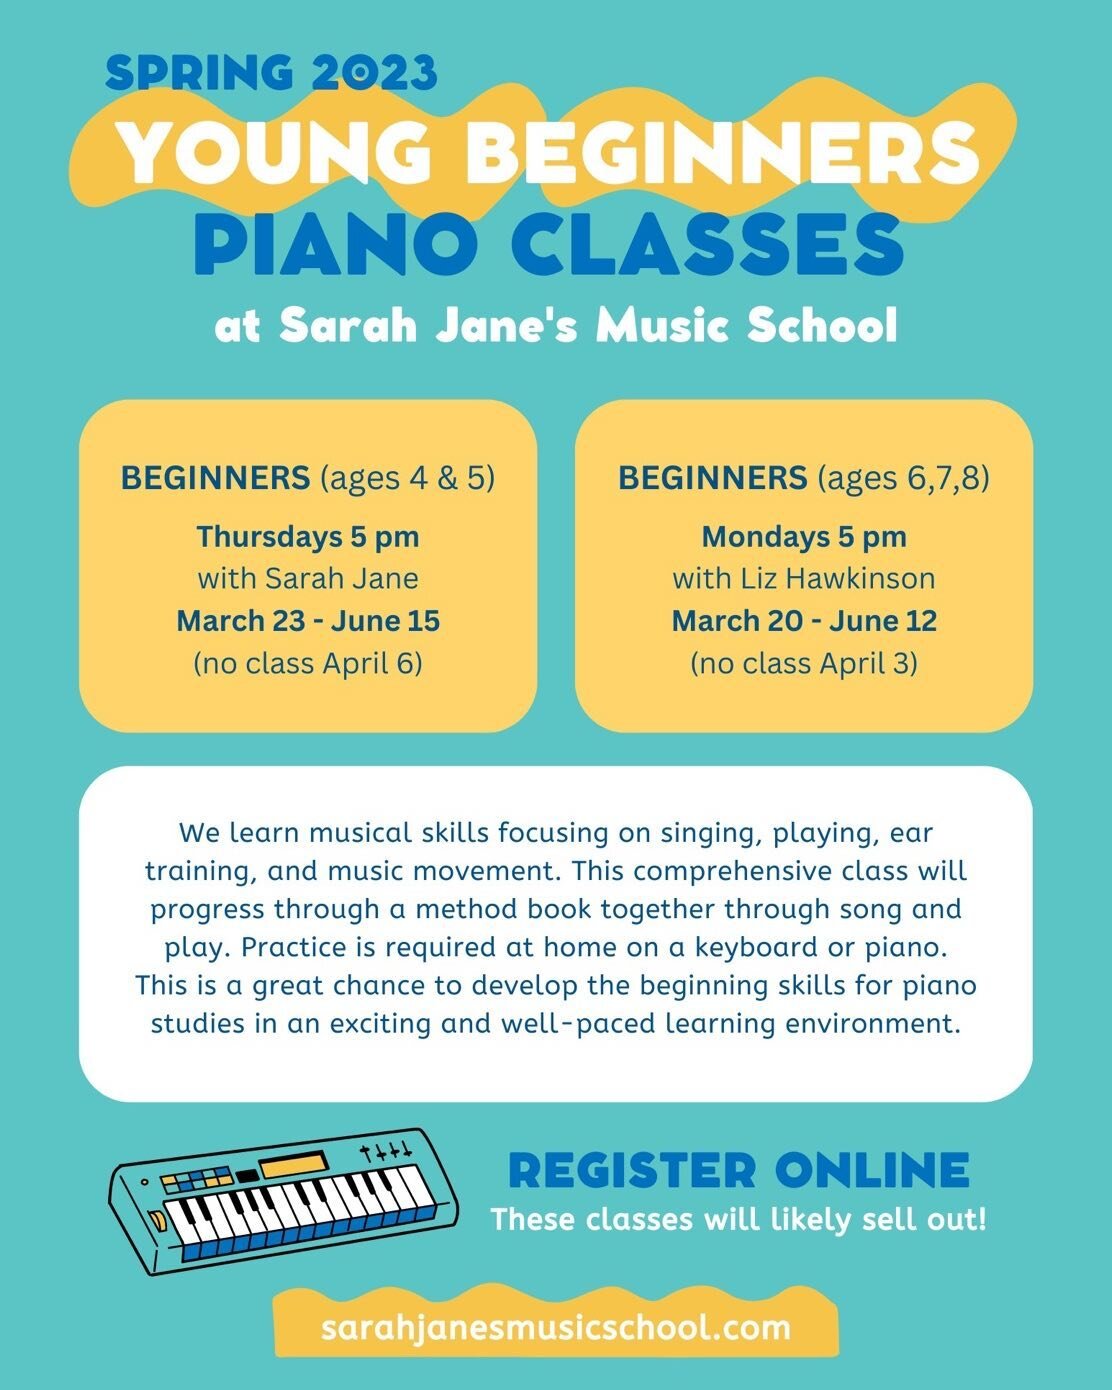 Superstar teachers Liz and Sarah Jane are starting the next round of piano classes! This is a great option for ages 4-8. Build those new practice habits and learn the foundations of piano in a fun group environment! 
Starts week of March 20 ⭐️⭐️⭐️